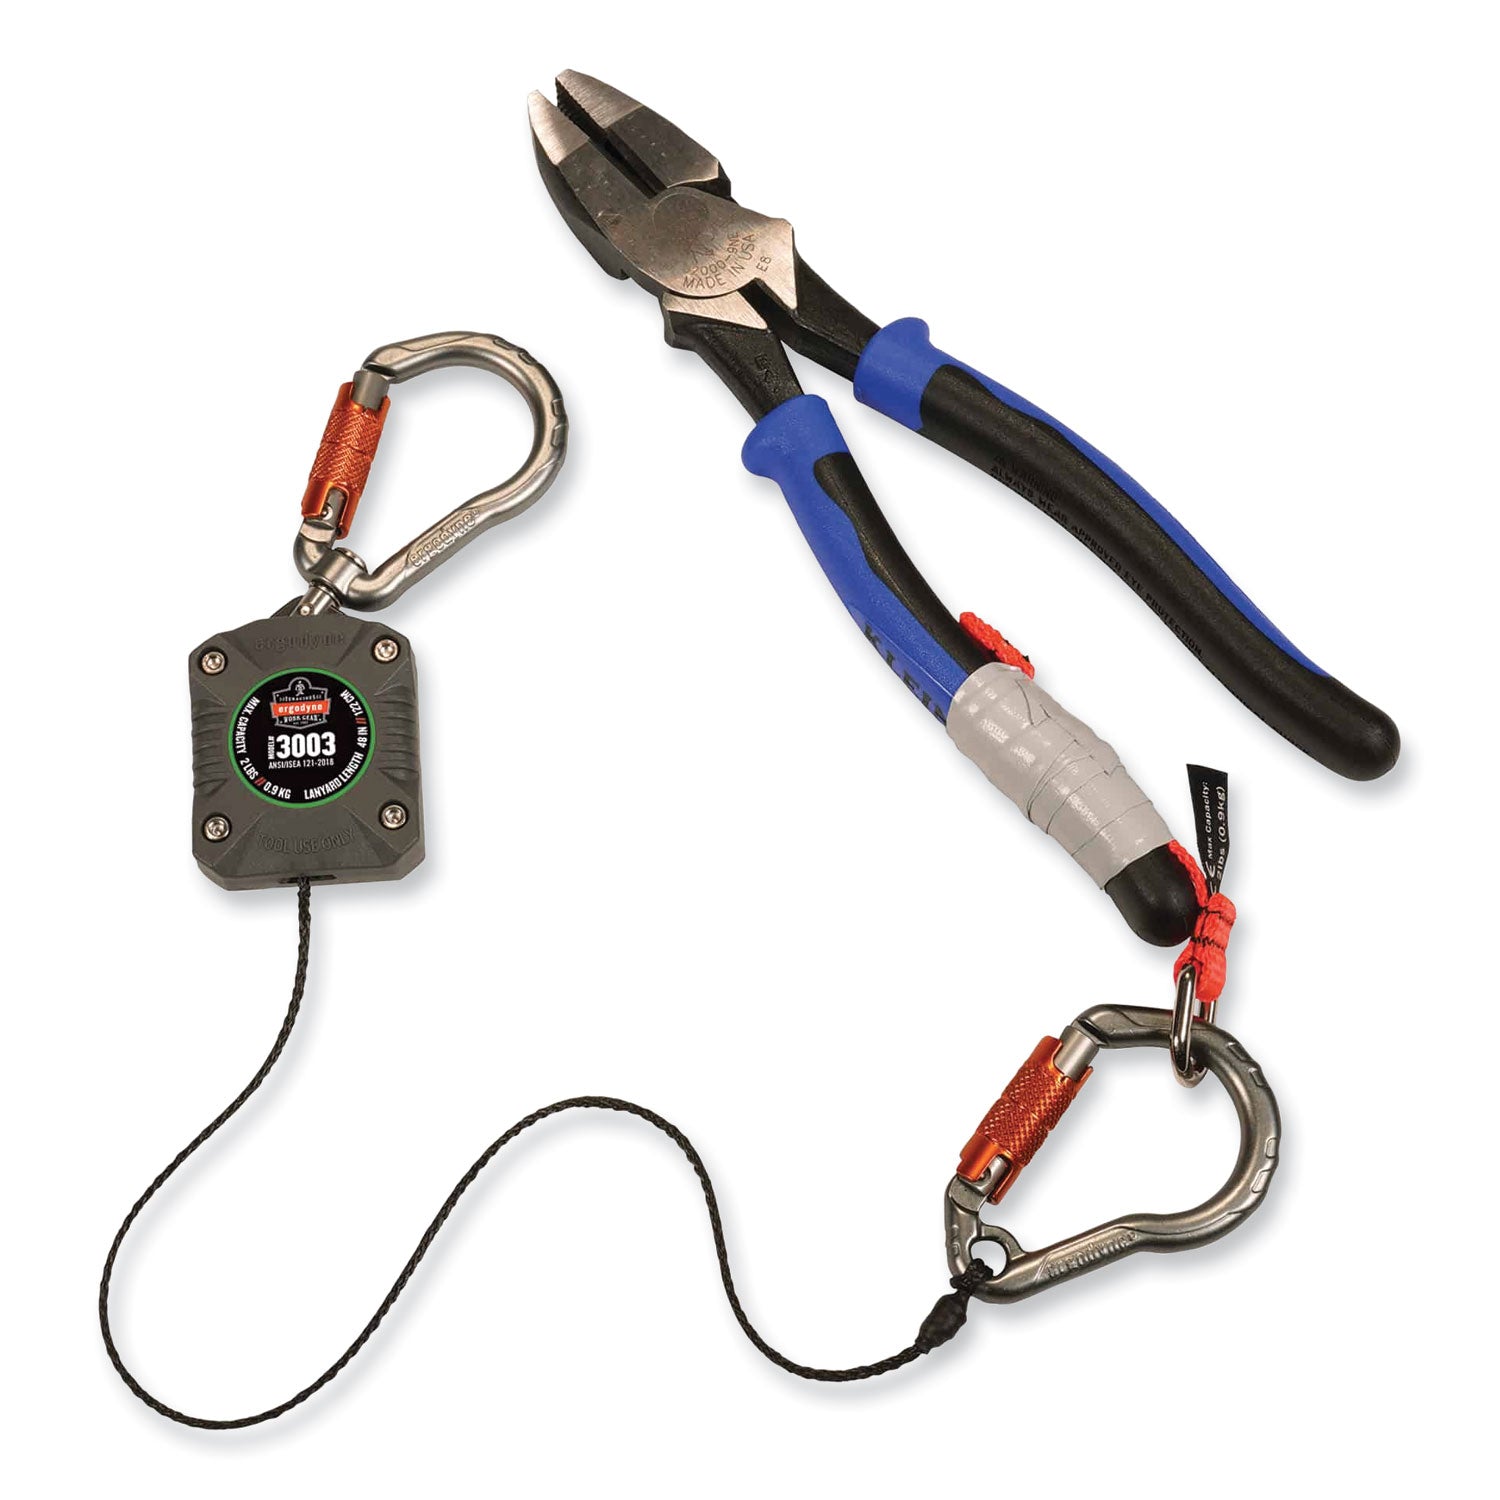 squids-3003-retractable-lanyard-with-two-carabiners-2-lb-max-working-capacity-8-to-48-gray-ships-in-1-3-business-days_ego19303 - 7